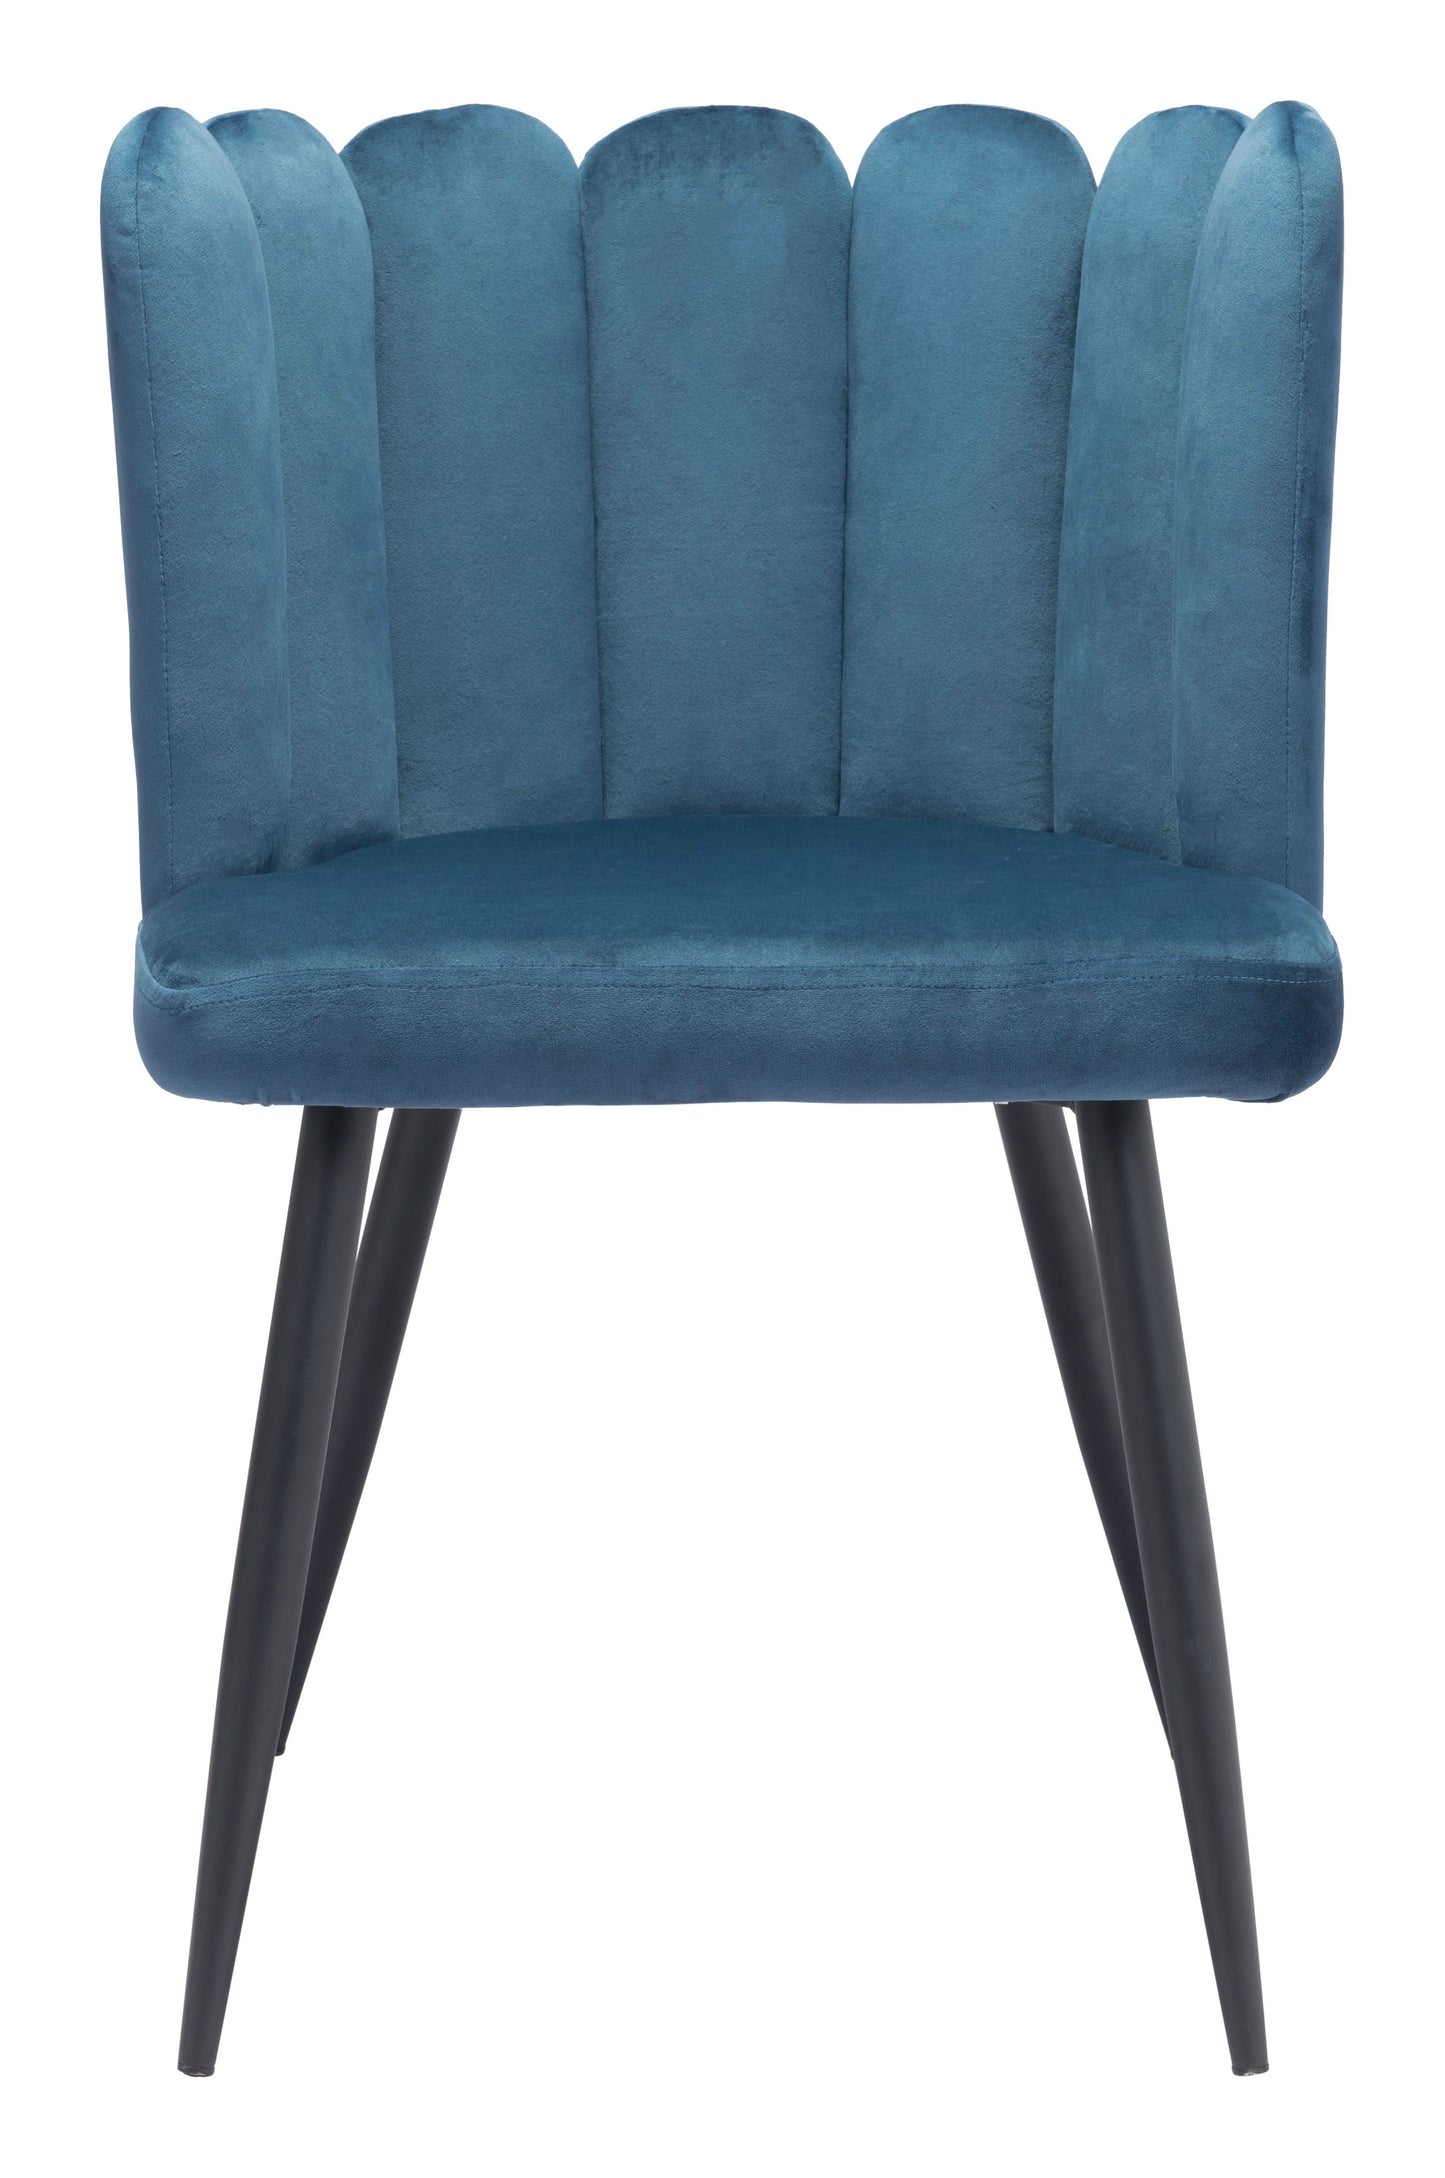 Adele Dining Chair Blue